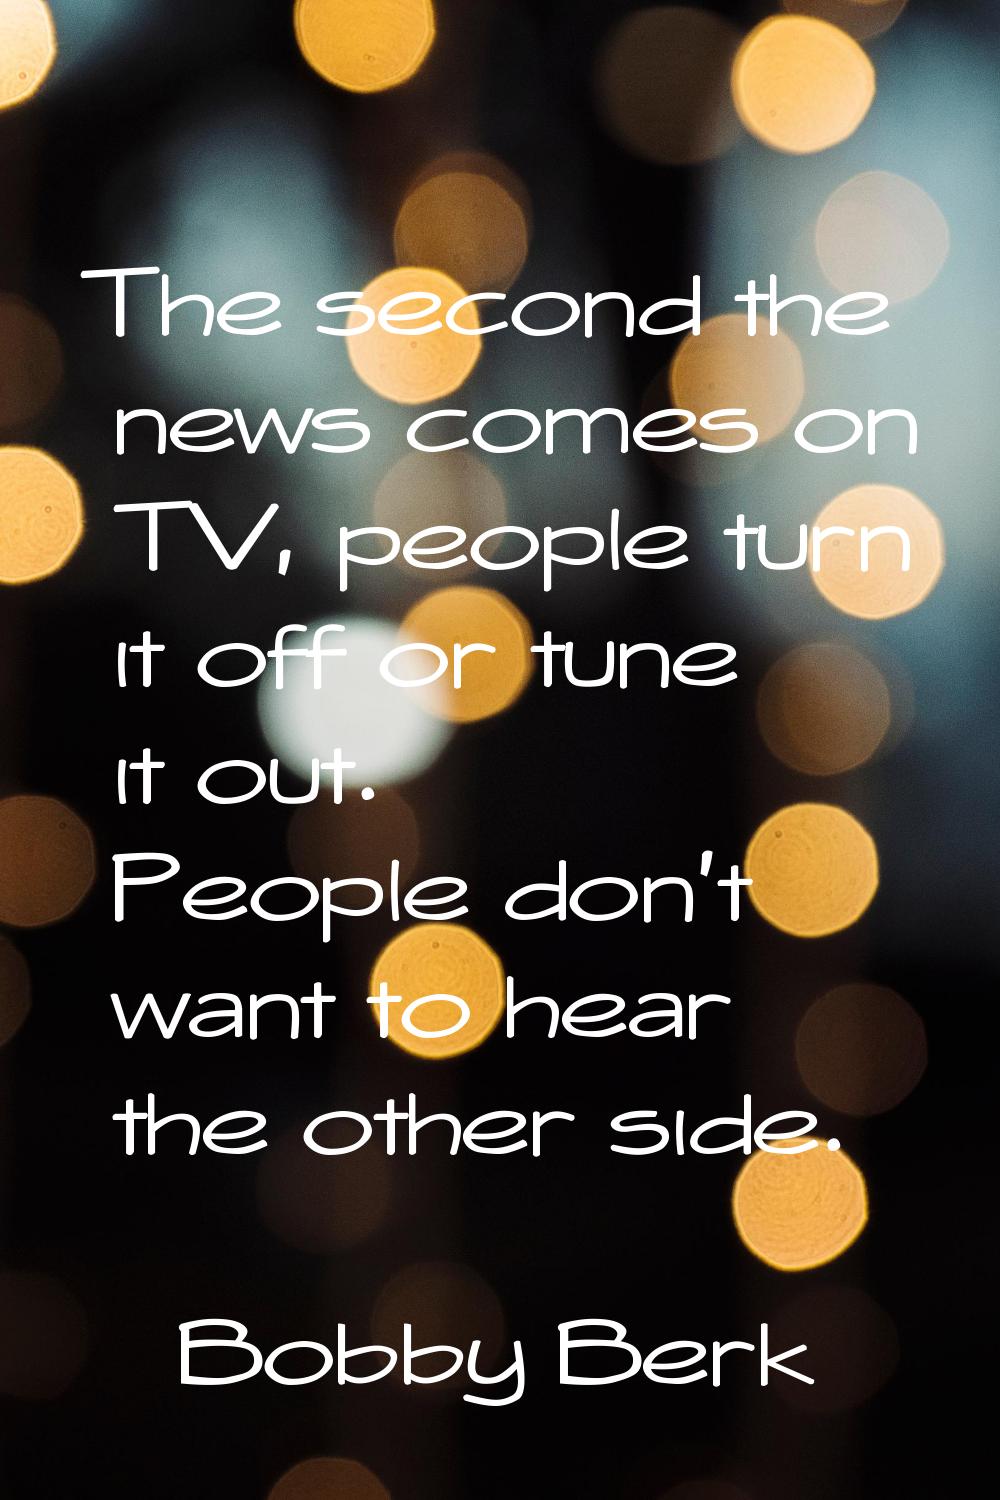 The second the news comes on TV, people turn it off or tune it out. People don't want to hear the o